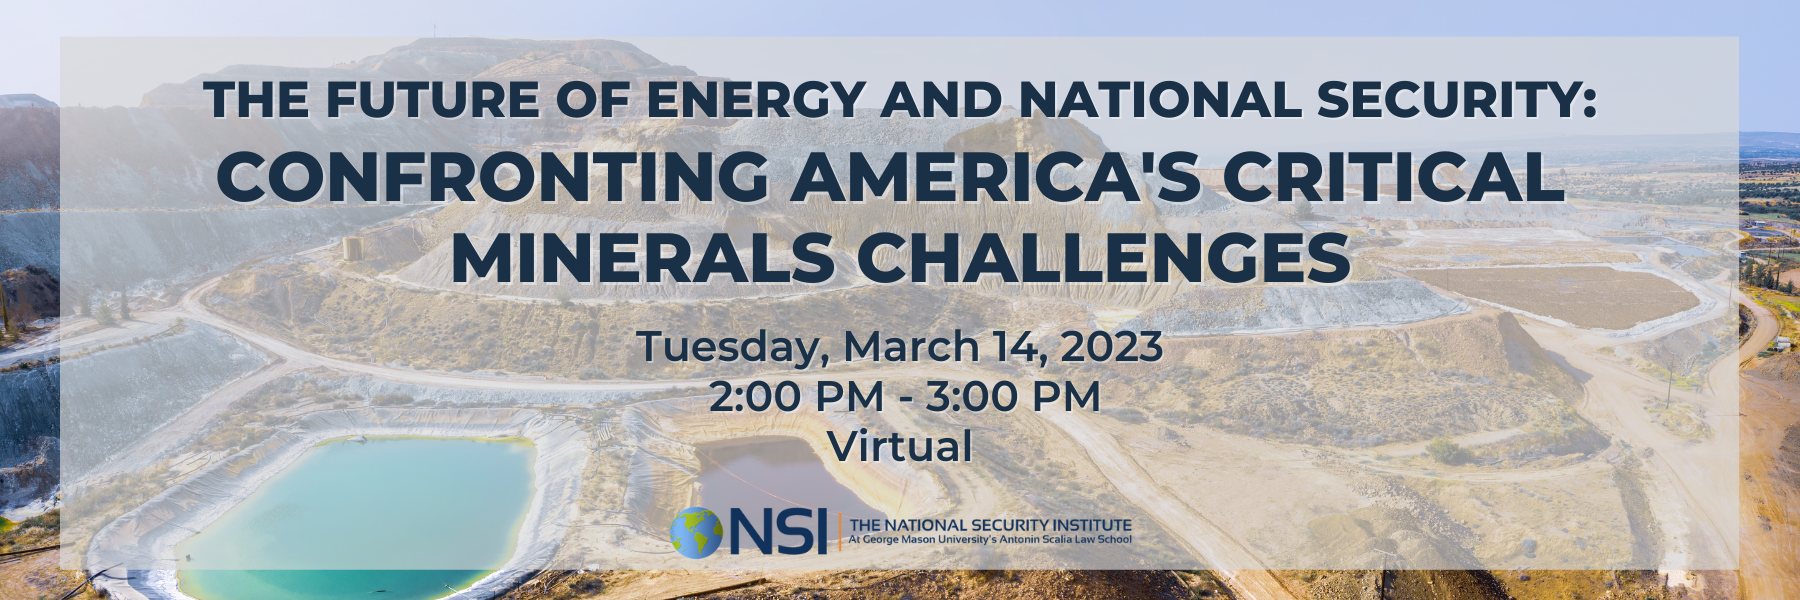 The Future of Energy and National Security: Confronting America's Critical Minerals Challenges